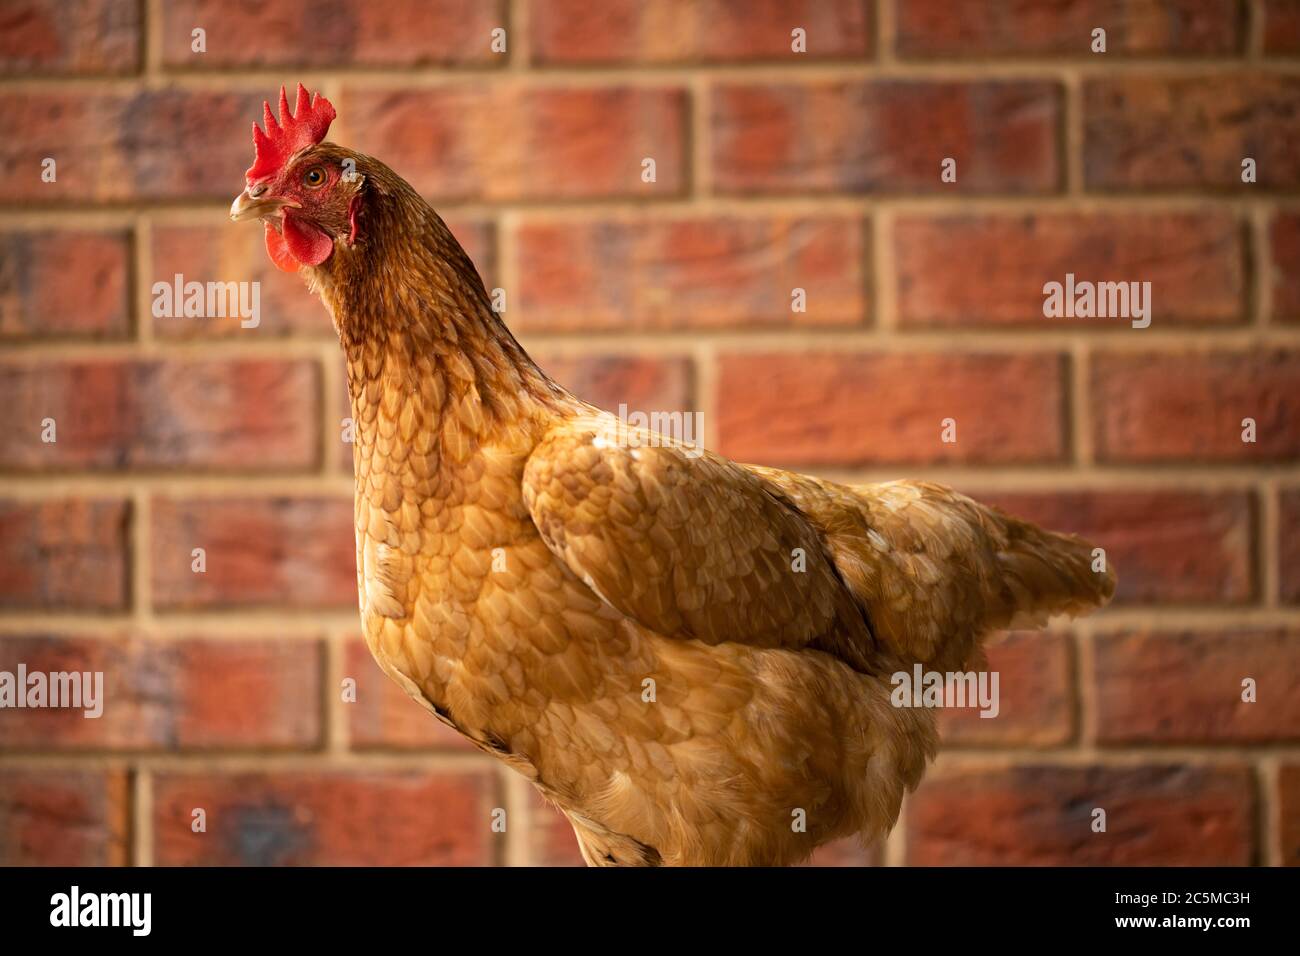 An egg laying free range Isa Brown Chicken with red bricks in the back ground Stock Photo